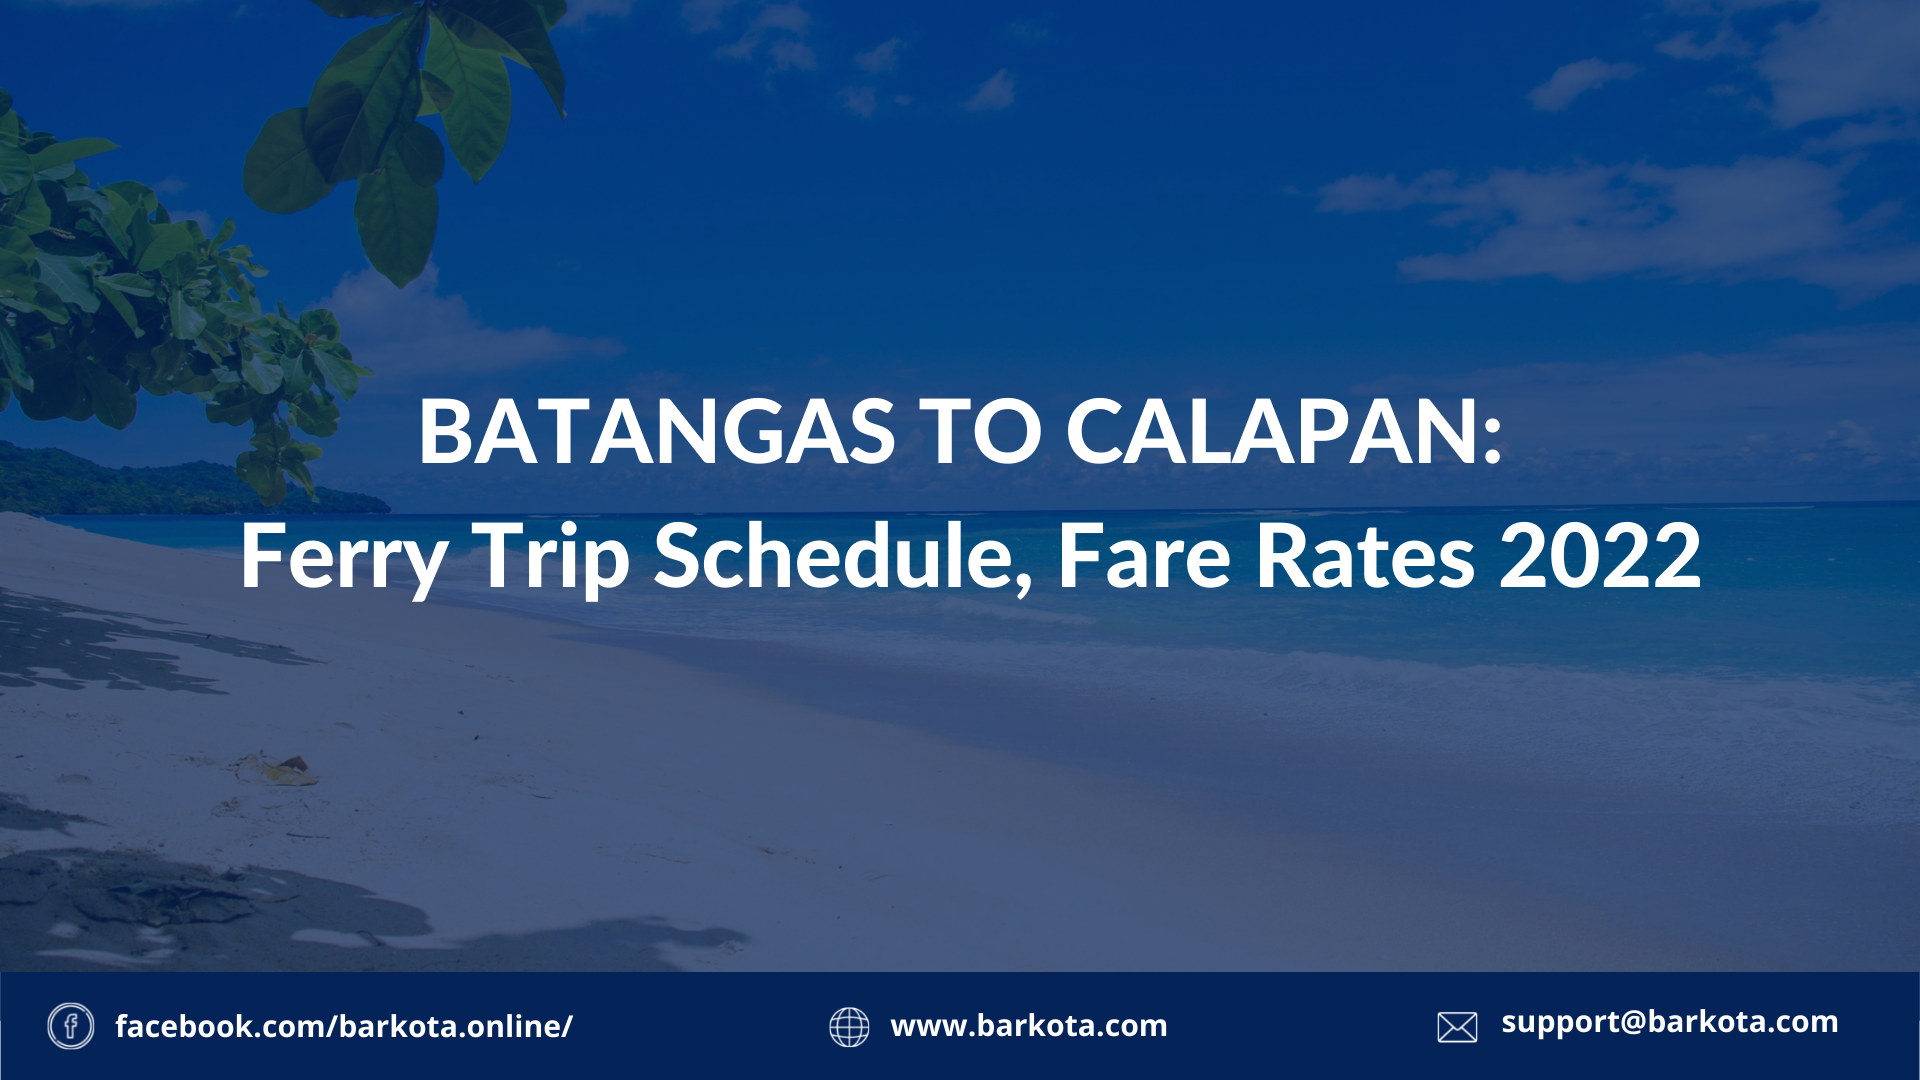 Batangas to Calapan Ferry Trip Schedule